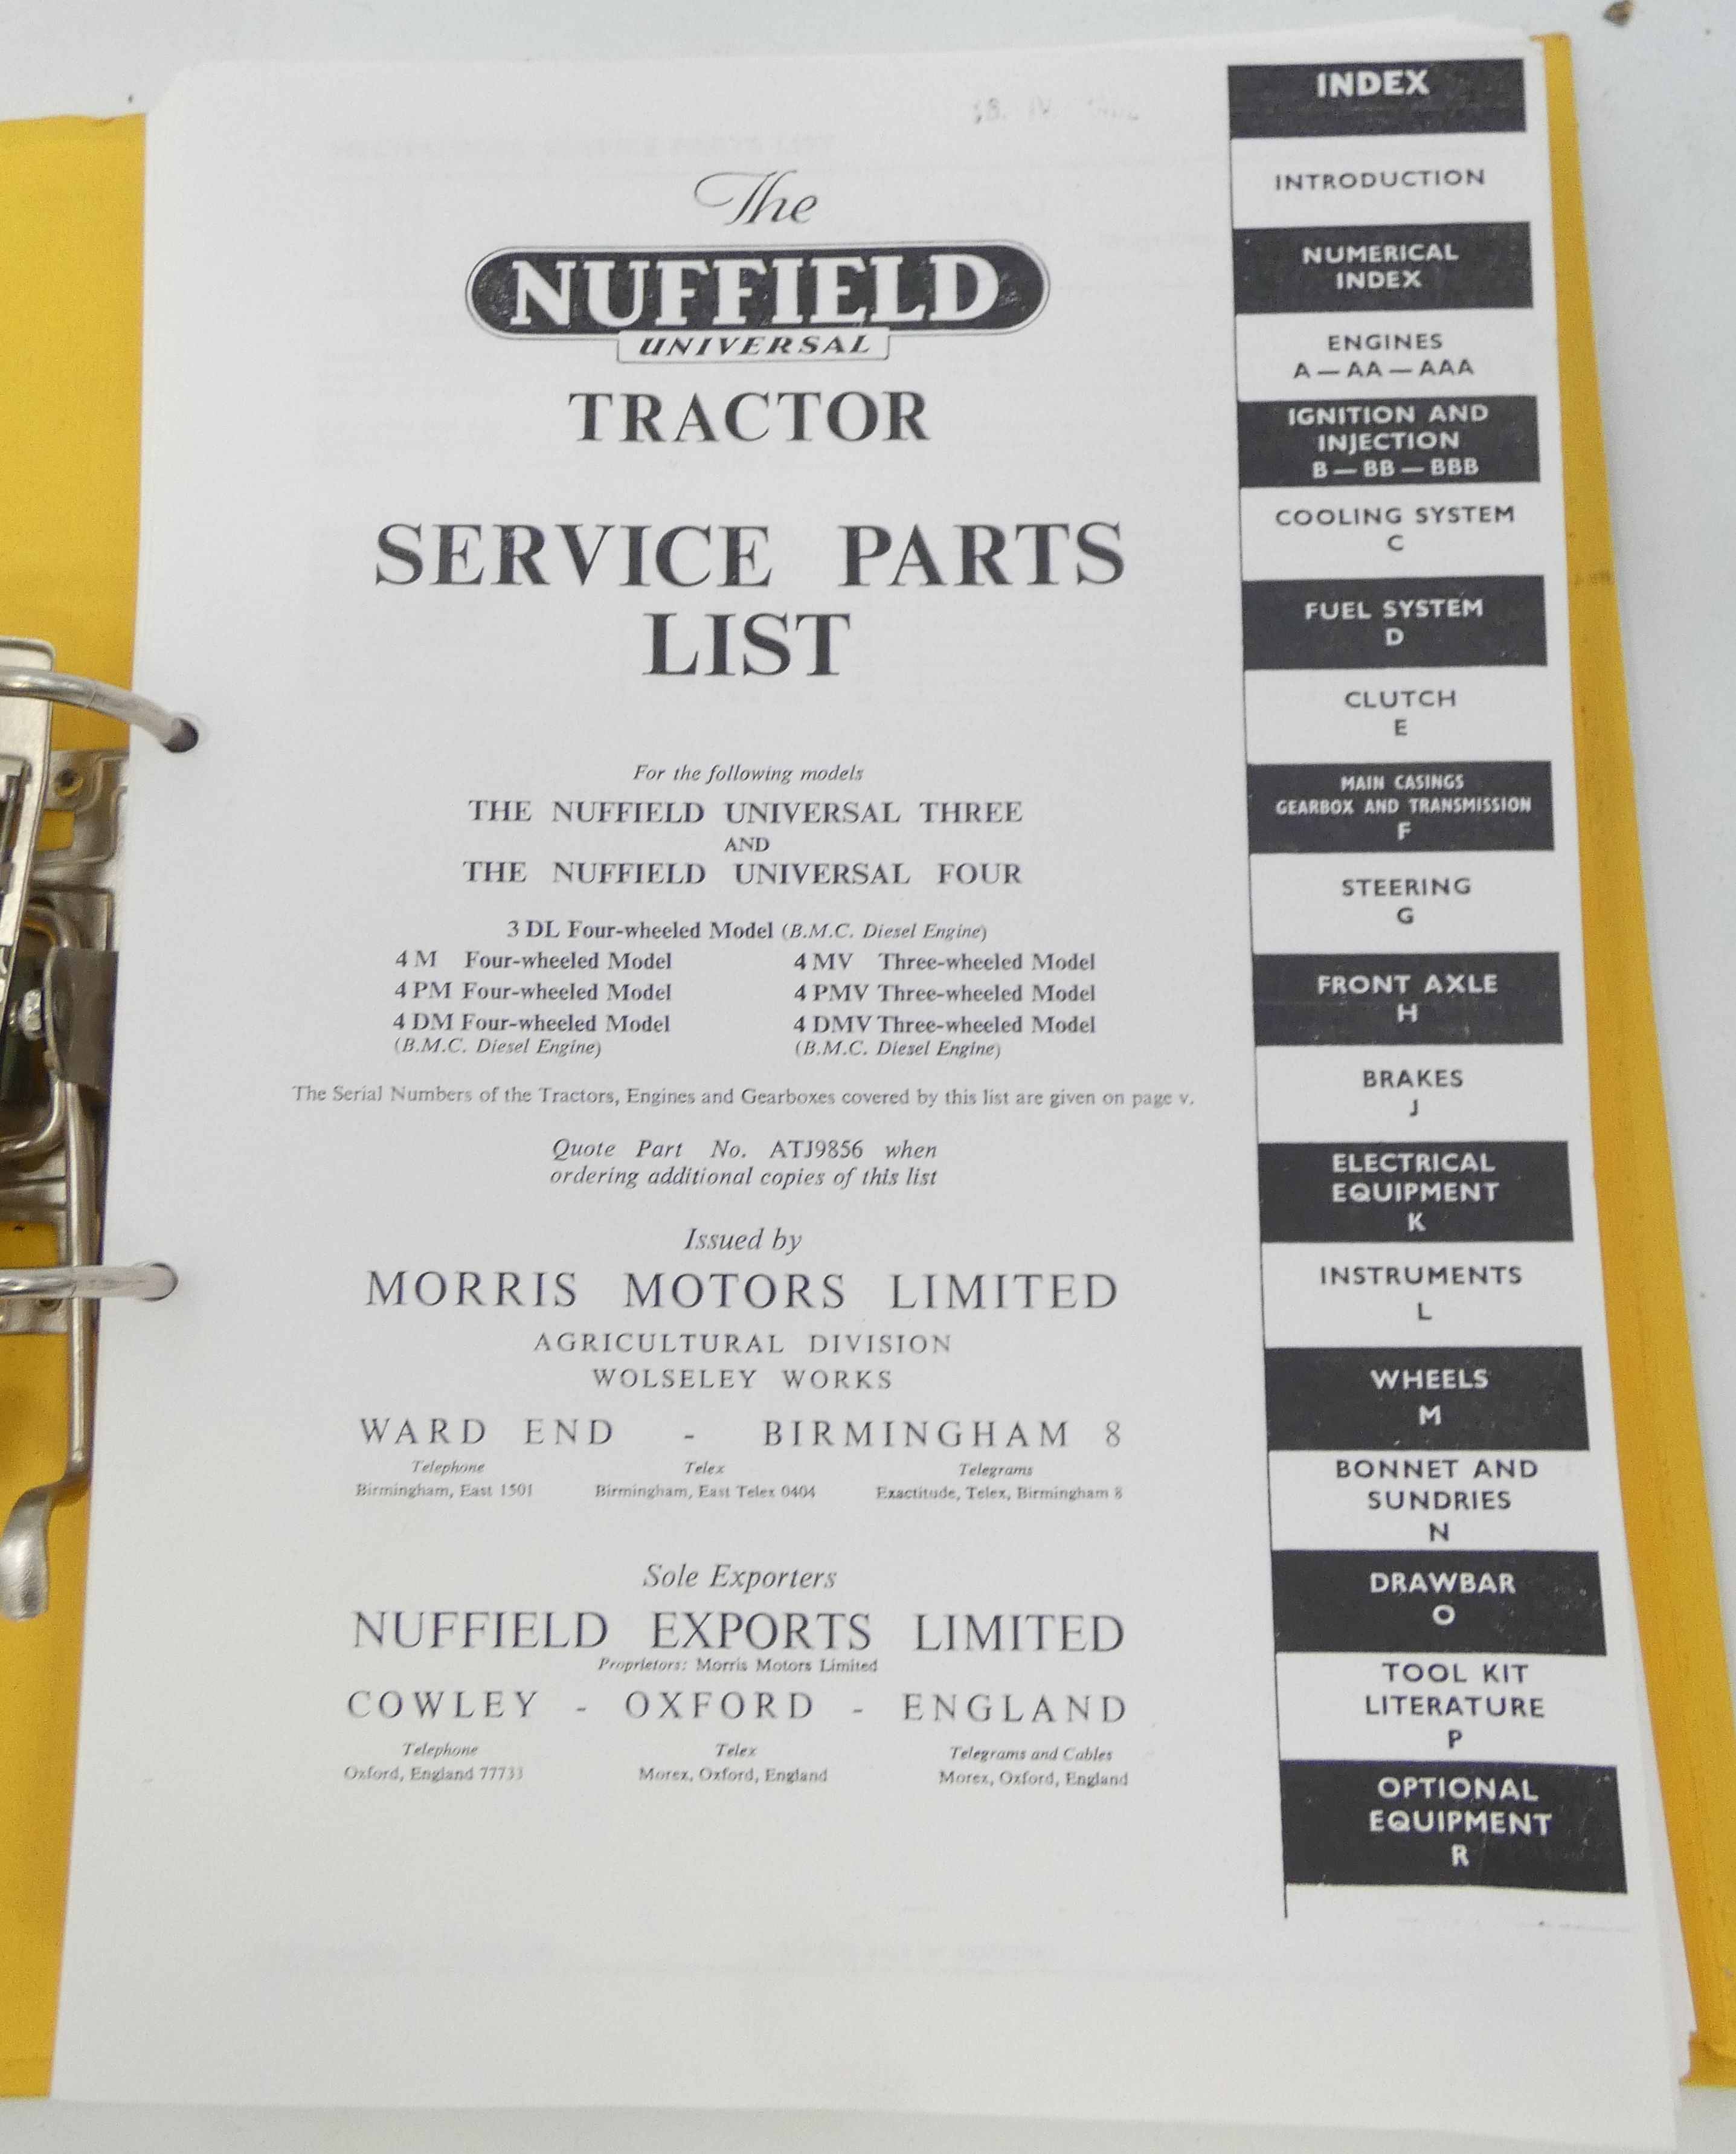 The Nuffield Universal three and four tractor service parts list